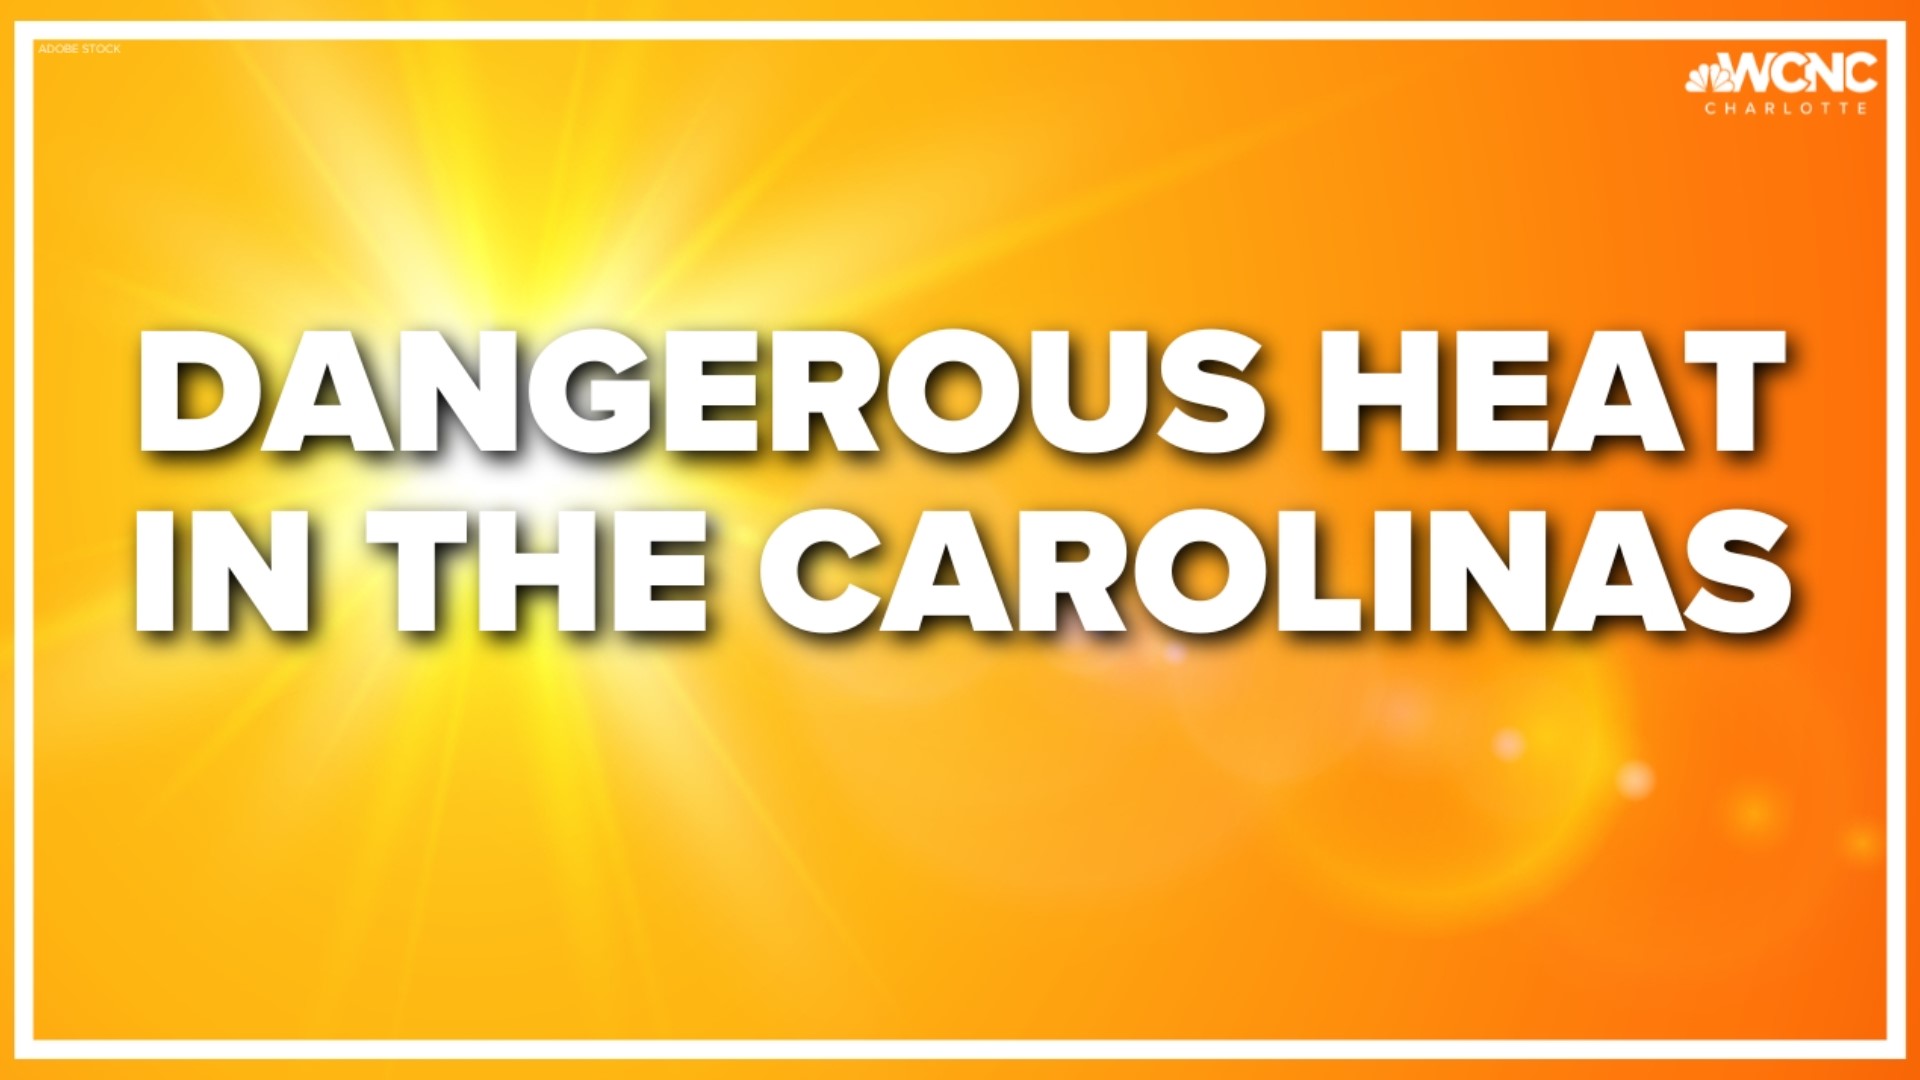 It's going to be a week to be Weather Aware in Charlotte and across the Carolinas as extreme temperatures from a heatwave will make it feel well over 100 degrees.